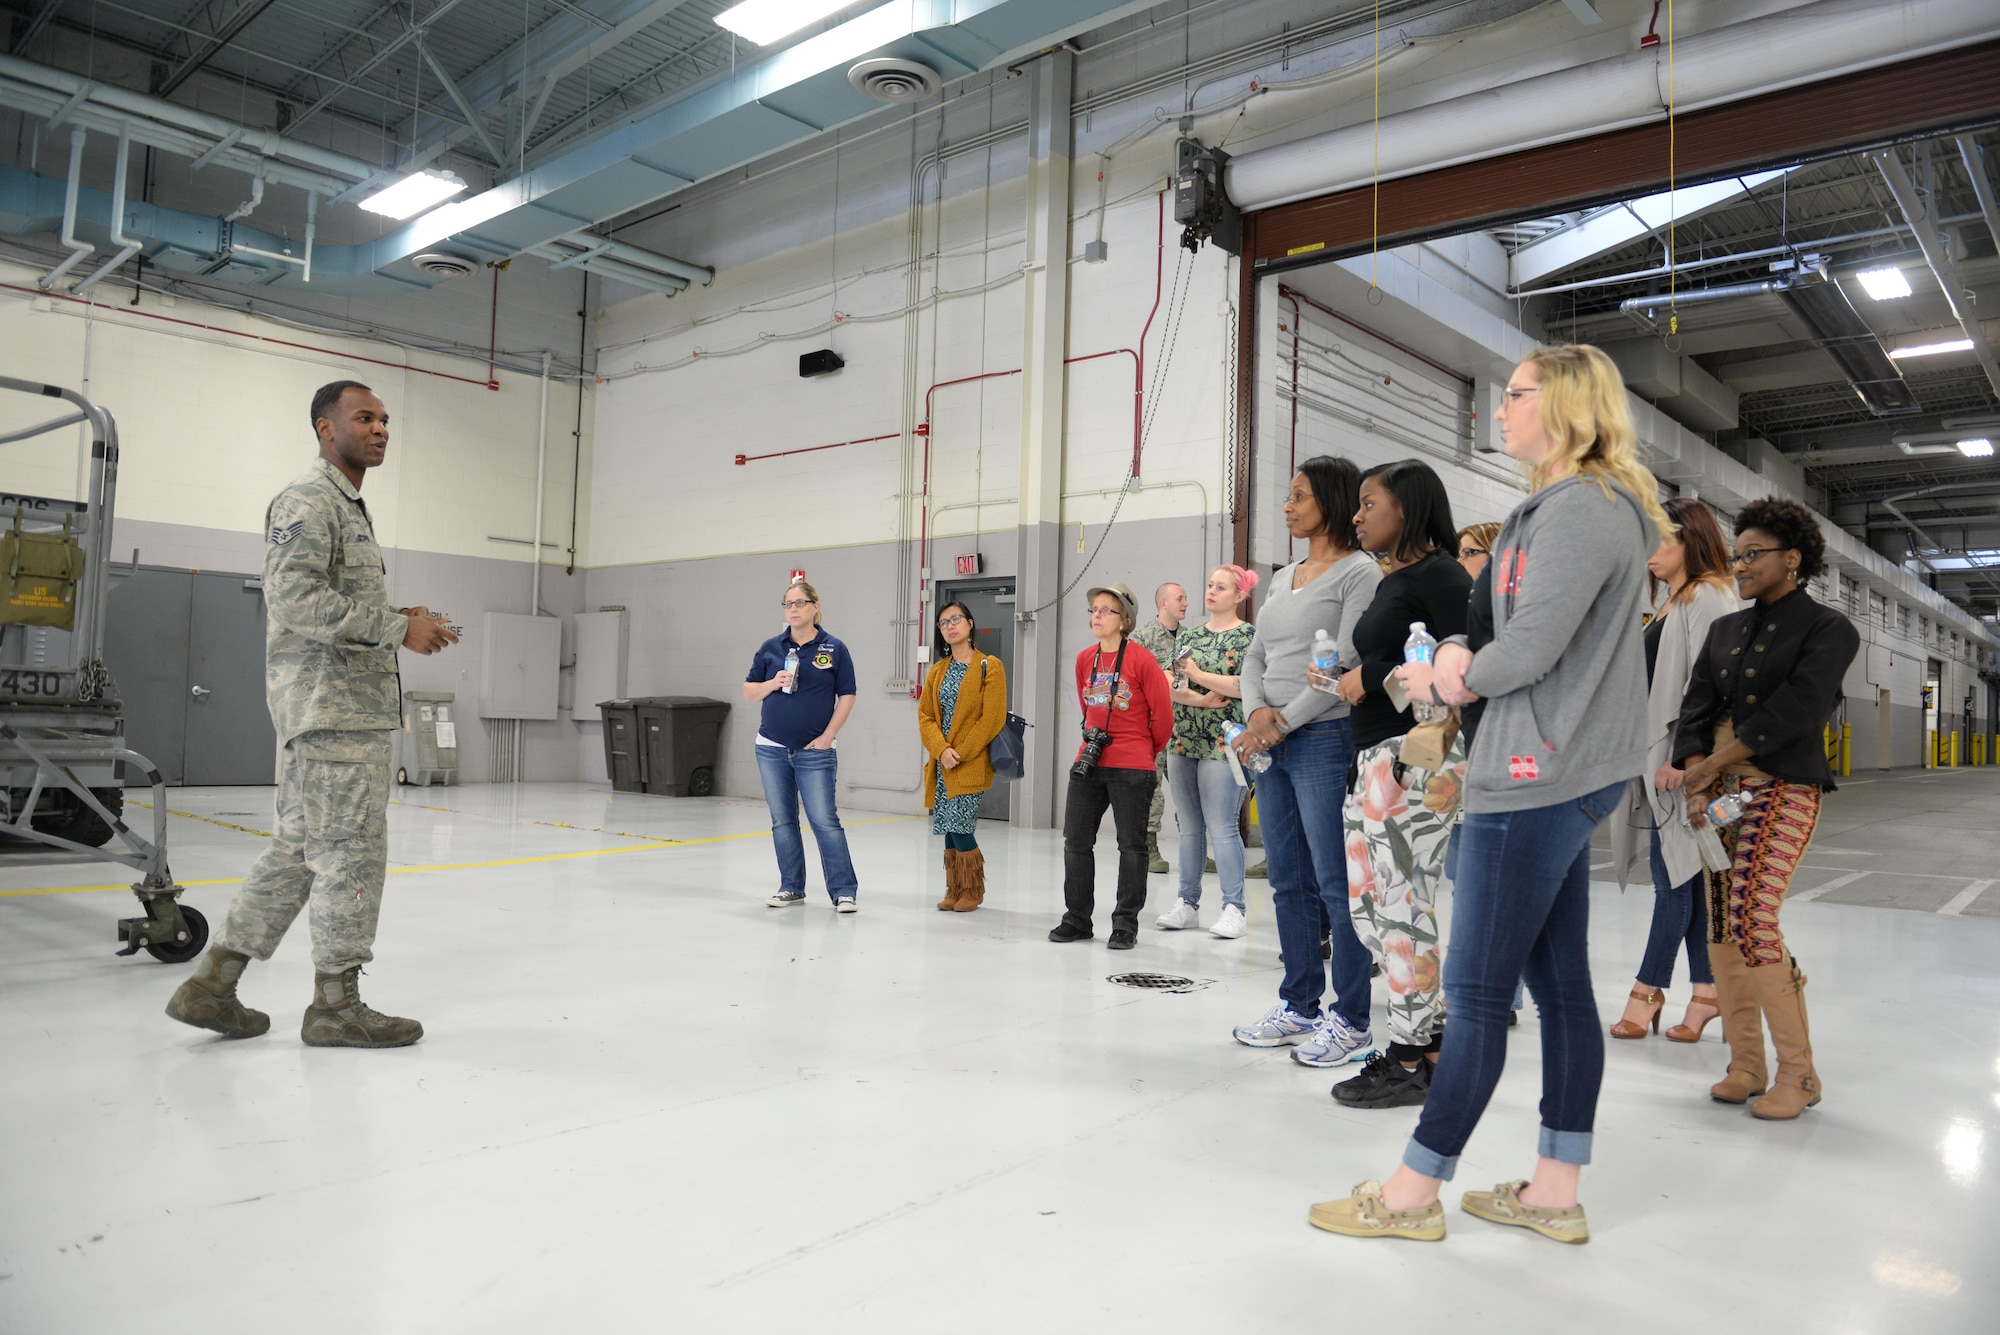 Staff Sgt. Andrew Scipio, 55th Maintenance Squadron aerospace ground equipment craftsman, gives a tour of the AGE shop to 55th MXS spouses in the Bennie L. Davis Maintenance Facility at Offutt Air Force Base, Neb., Feb. 17, 2017. Members of the 55th MXS had a chance to show their spouses what they do for the Air Force.(U.S. Air Force photo by Zachary Hada)